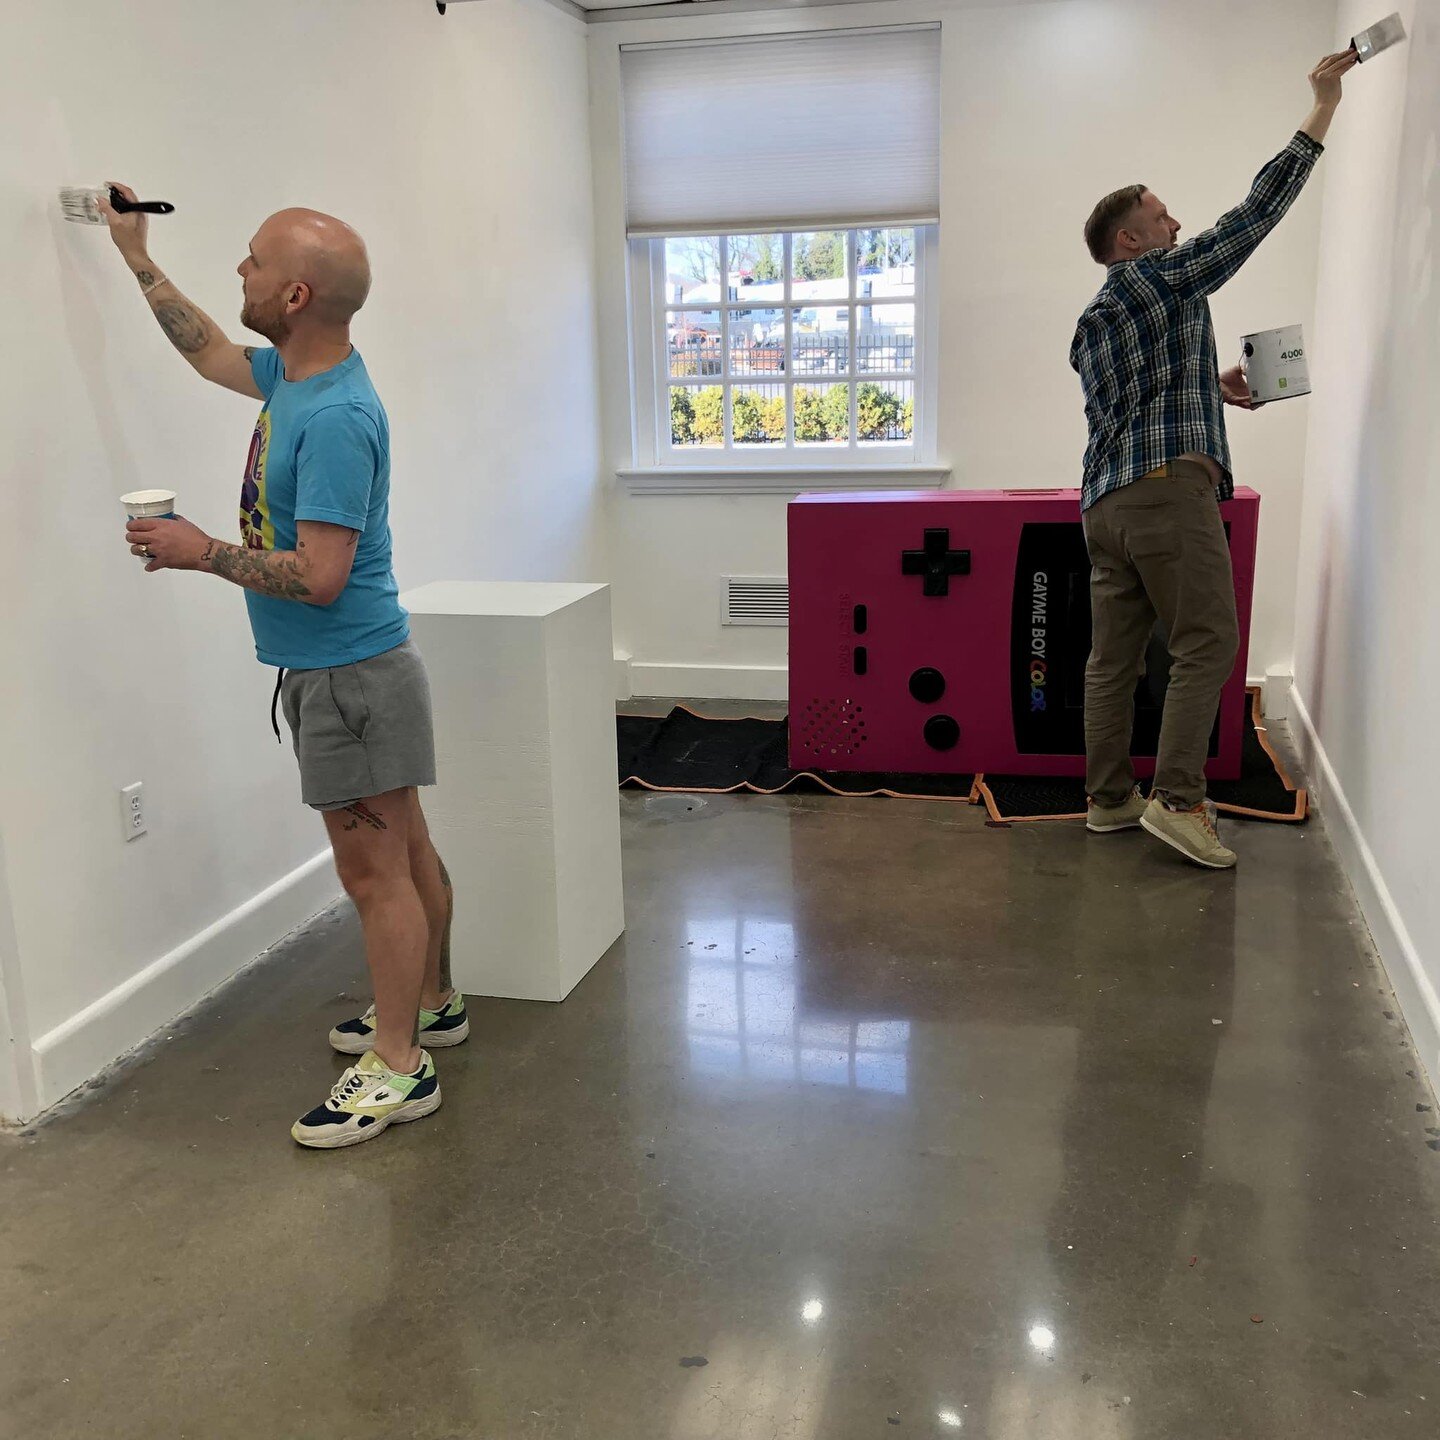 Touching up the walls for our two new shows opening Friday at 7pm. More info at https://www.diversityrichmond.org/iridian-gallery